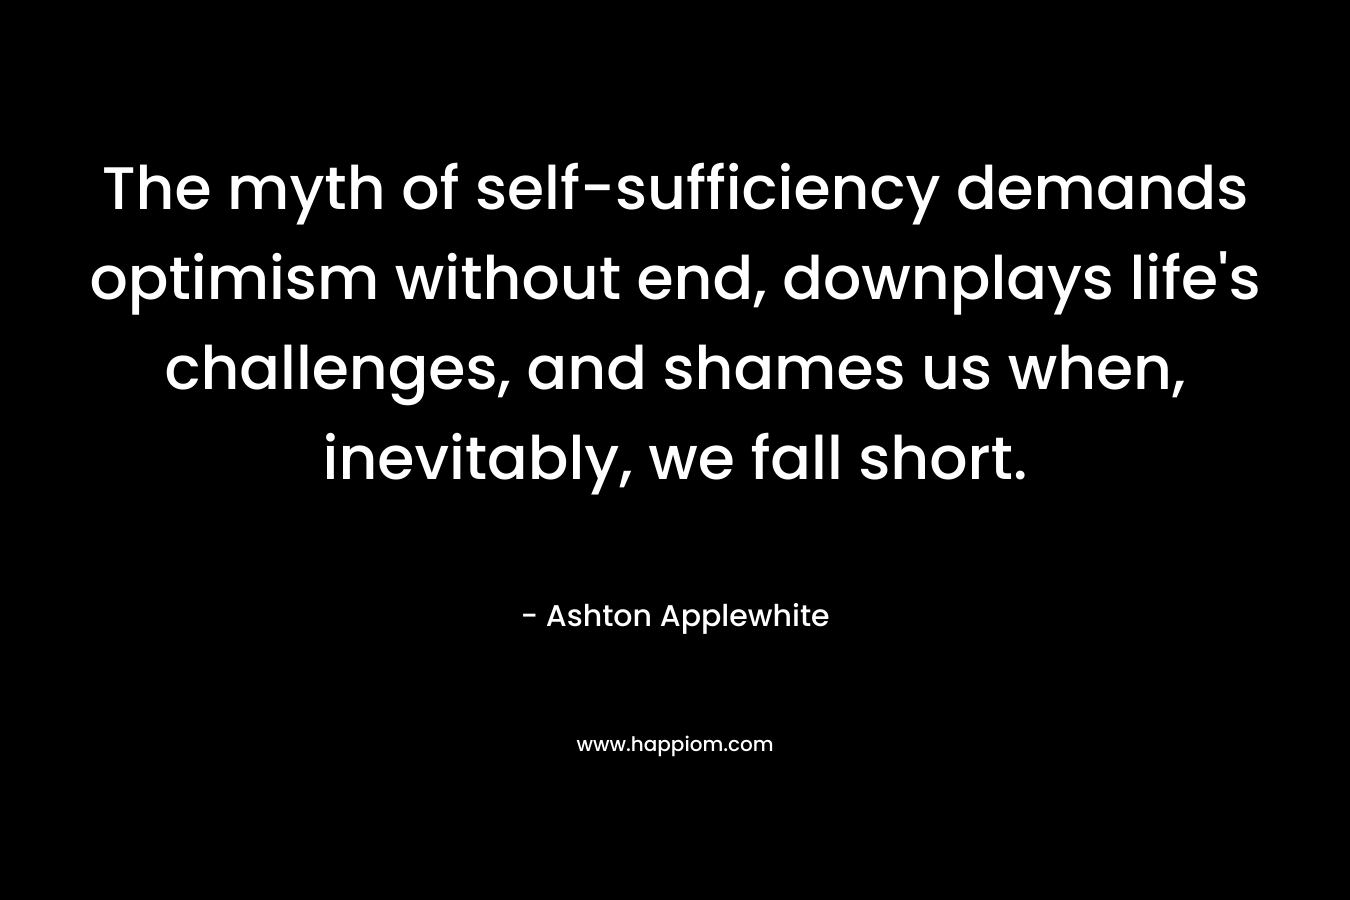 The myth of self-sufficiency demands optimism without end, downplays life's challenges, and shames us when, inevitably, we fall short.